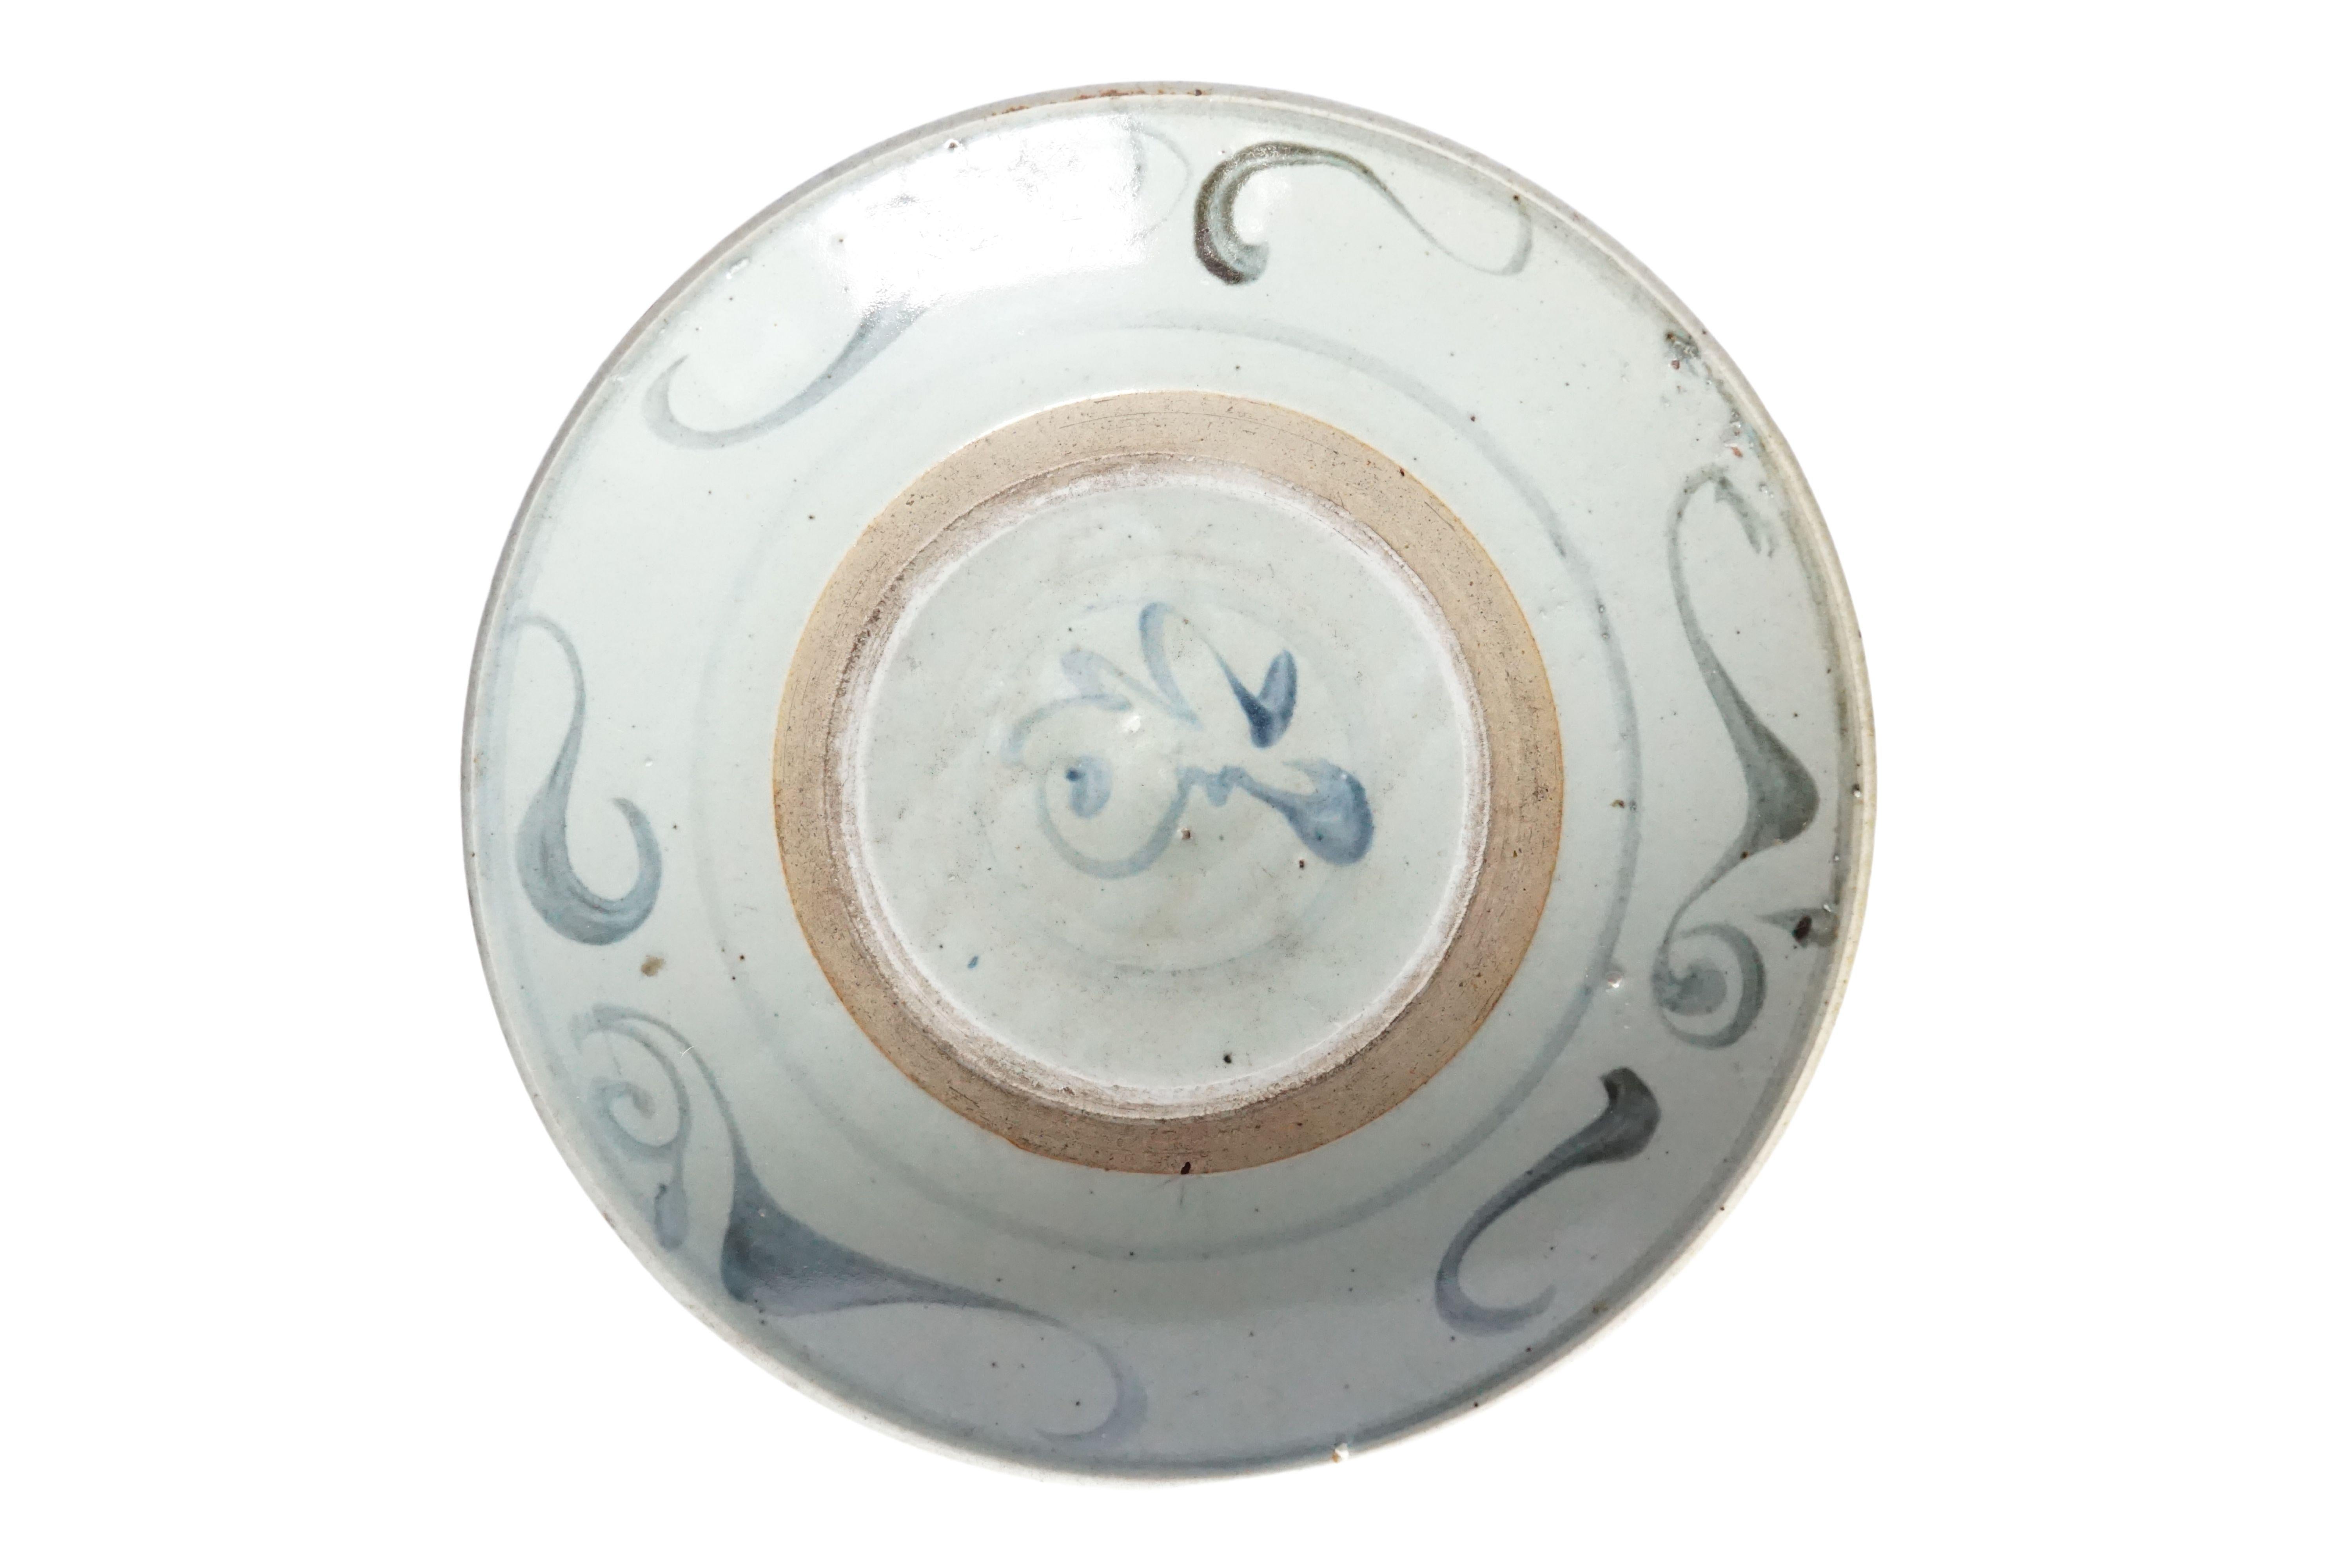 This Chinese ceramic plate is dominated by a blue-grey glaze and features wonderful hand painted blue strokes. Once used as an every day plate it is now a great example of Chinese ceramic and would make for a wonderful serving plate, table